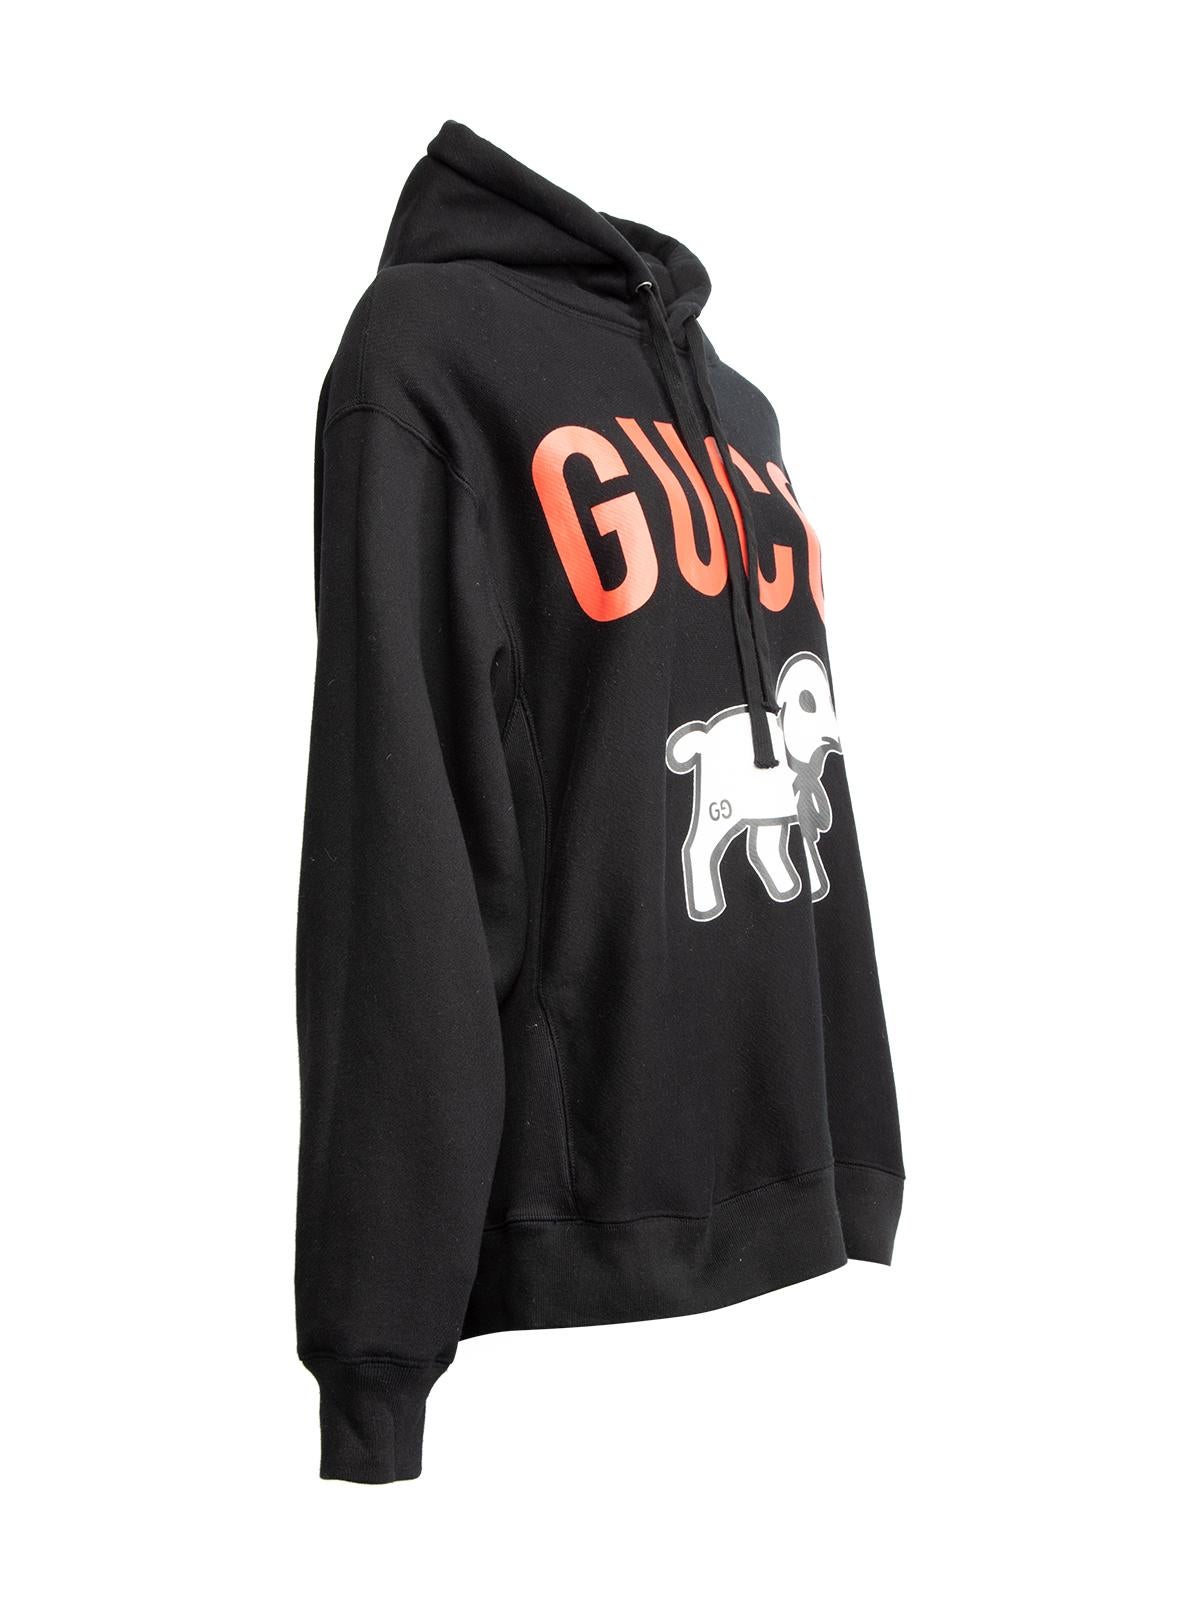 CONDITION is Very good. Minimal wear to hoodie is evident. There is a small snag to material around the left shoulder on this used Gucci designer resale item. Details Black Cotton Lamb motif Long sleeves Hood Made in Italy Composition 100% (Cotton)